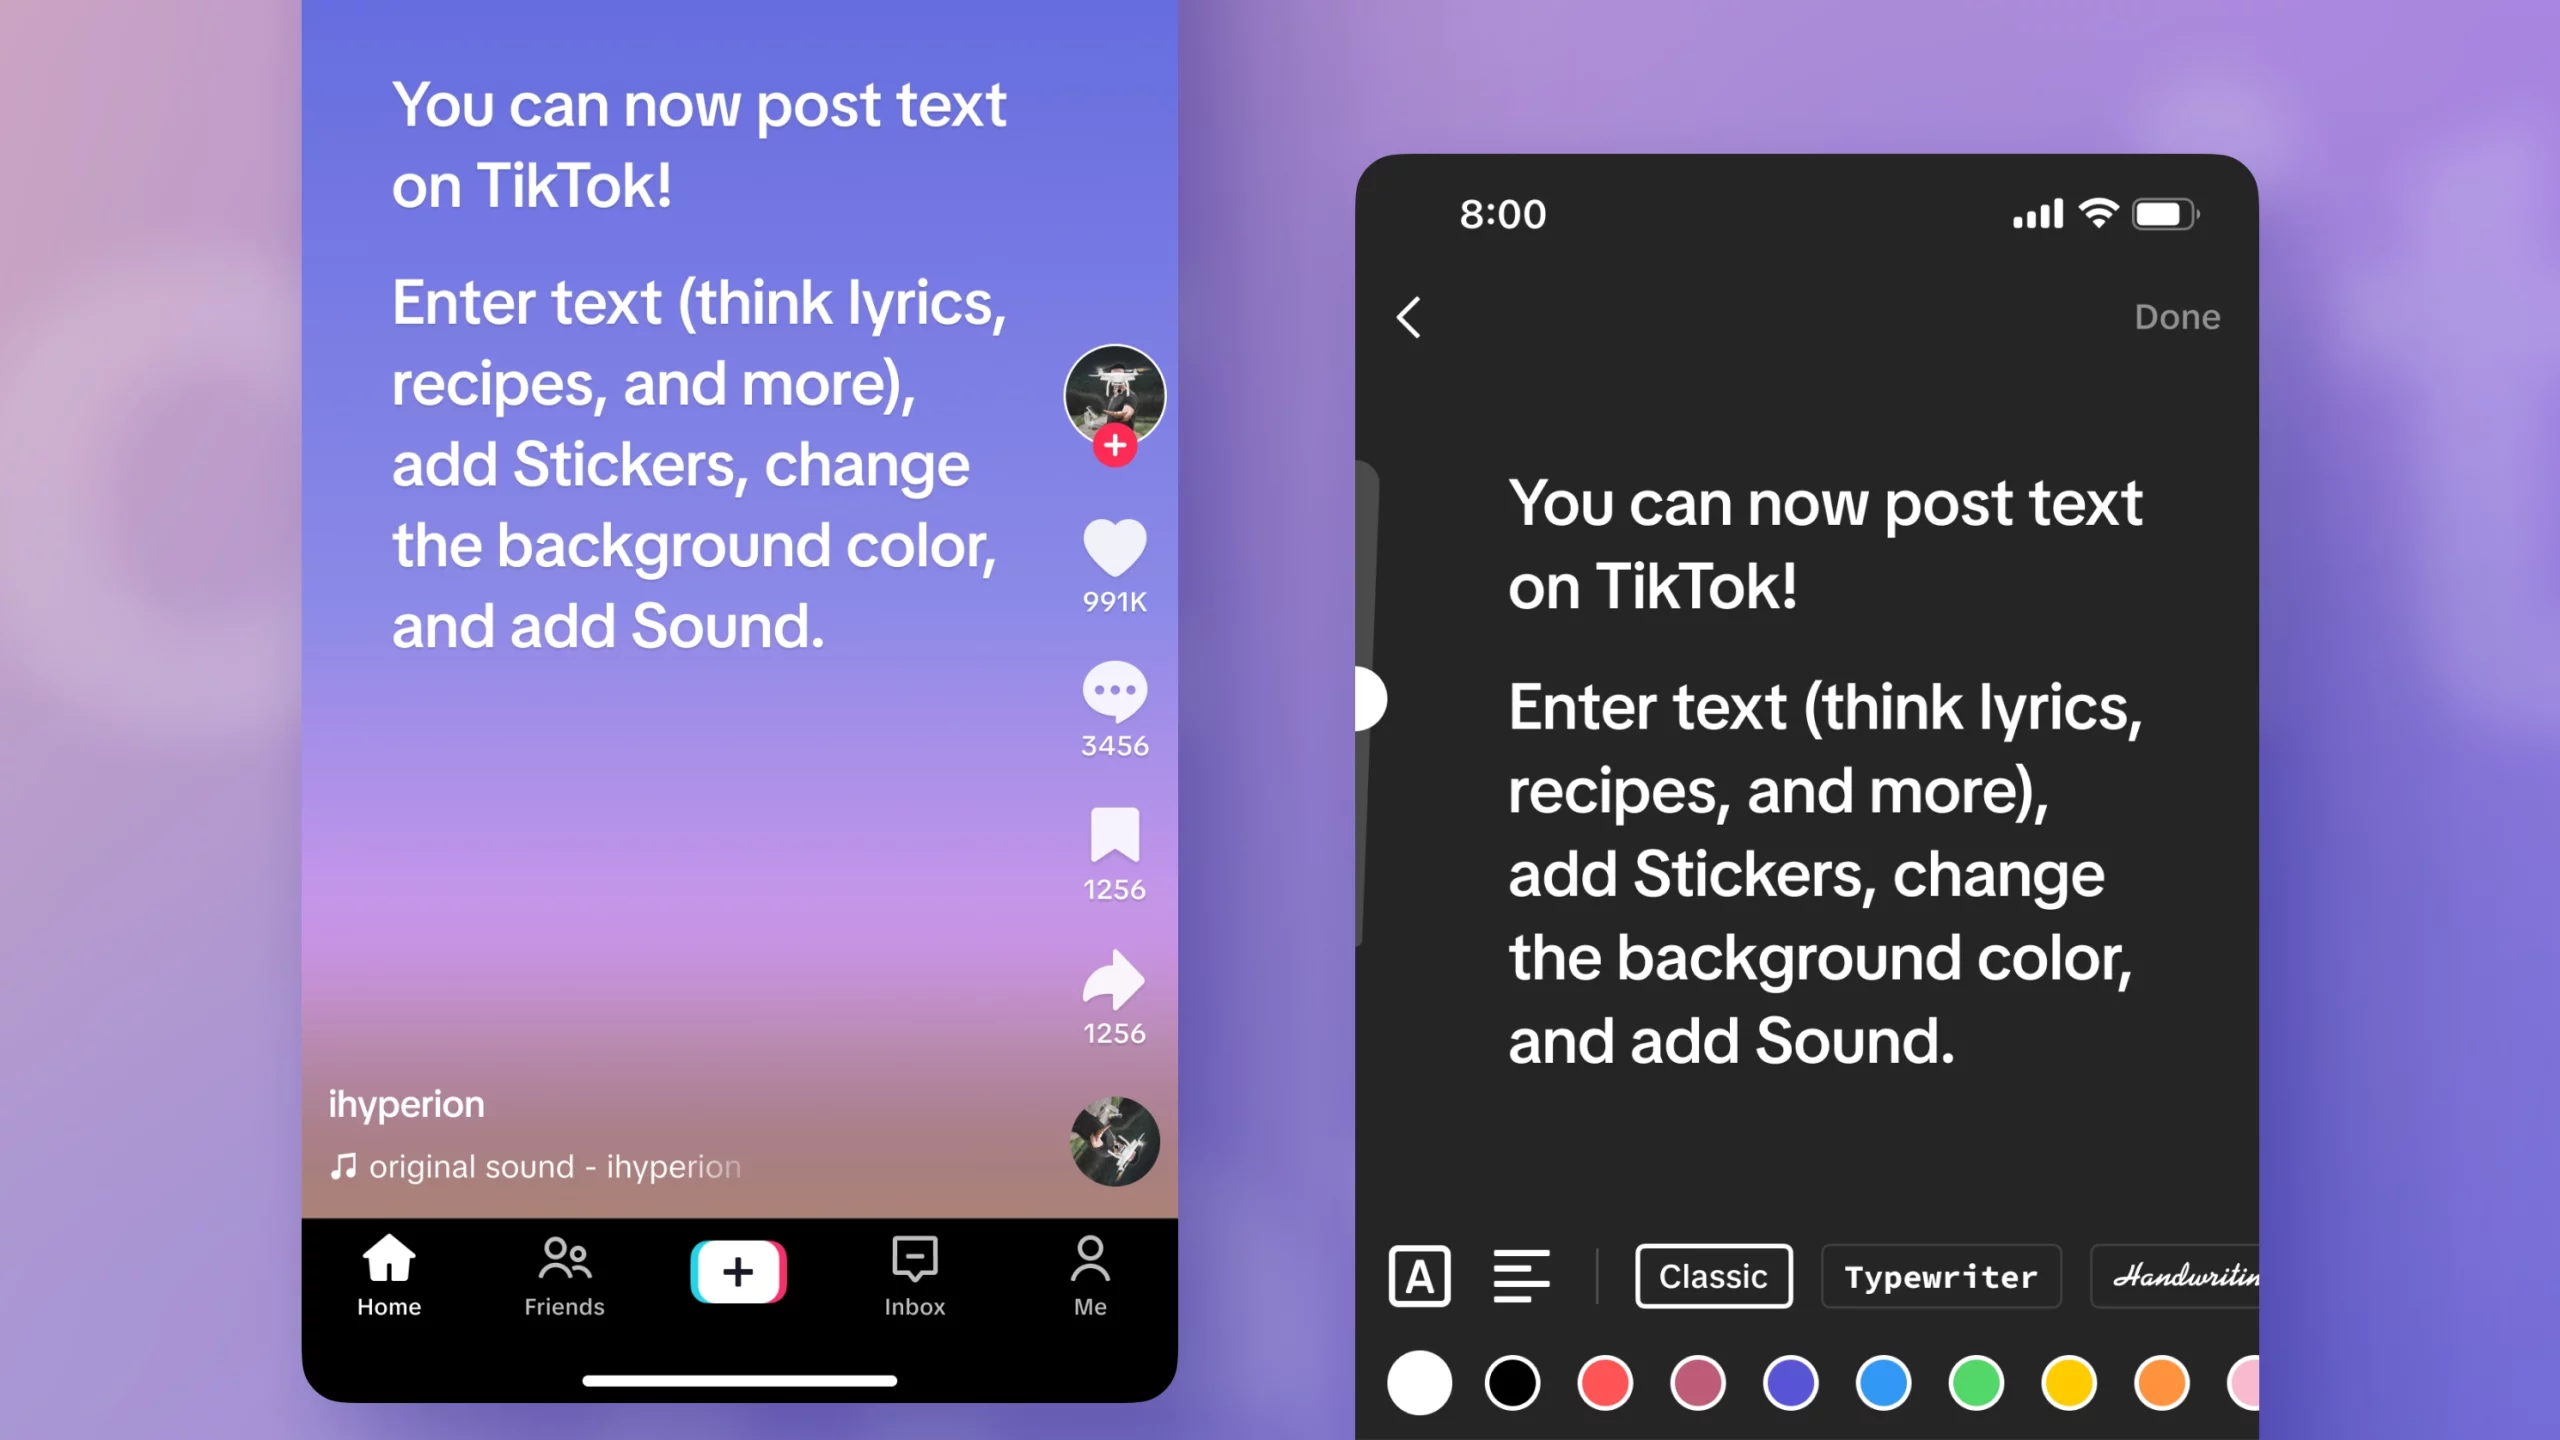 TikTok’s New Feature: Text-Only Posts